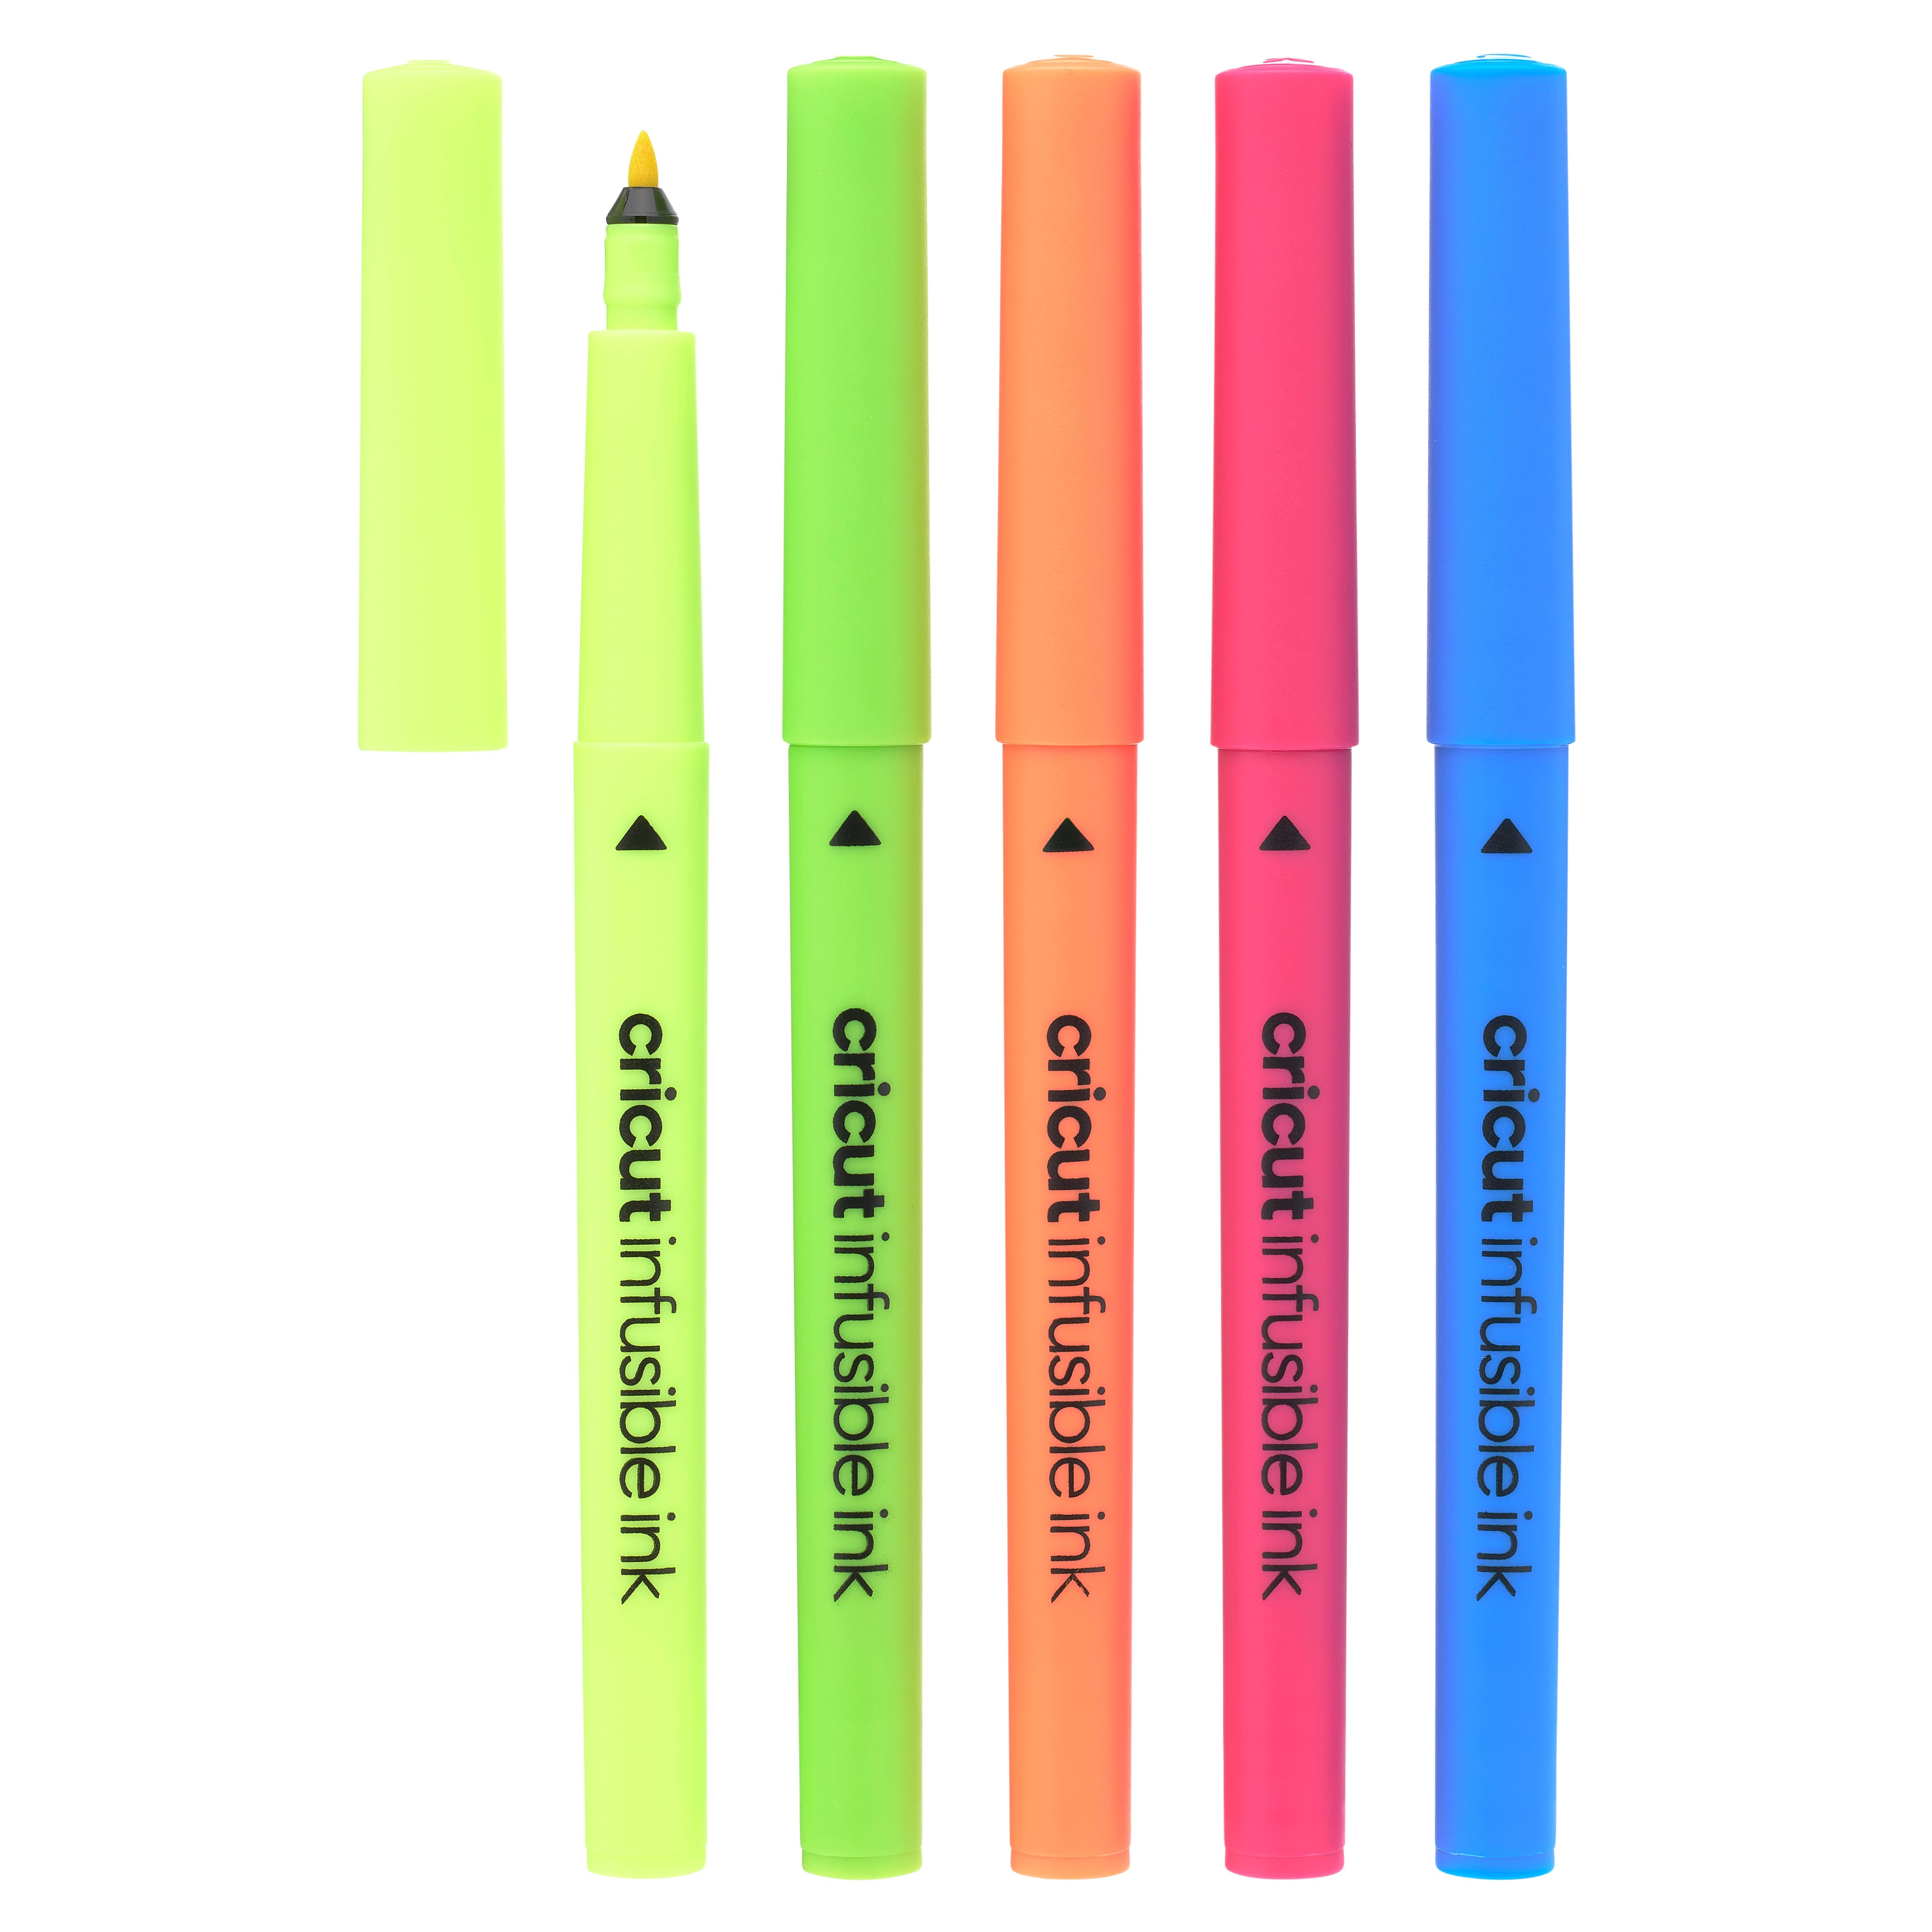 Cricut Infusible Ink Markers Pens Neon 1.0 and Basic Lot of 2 packs